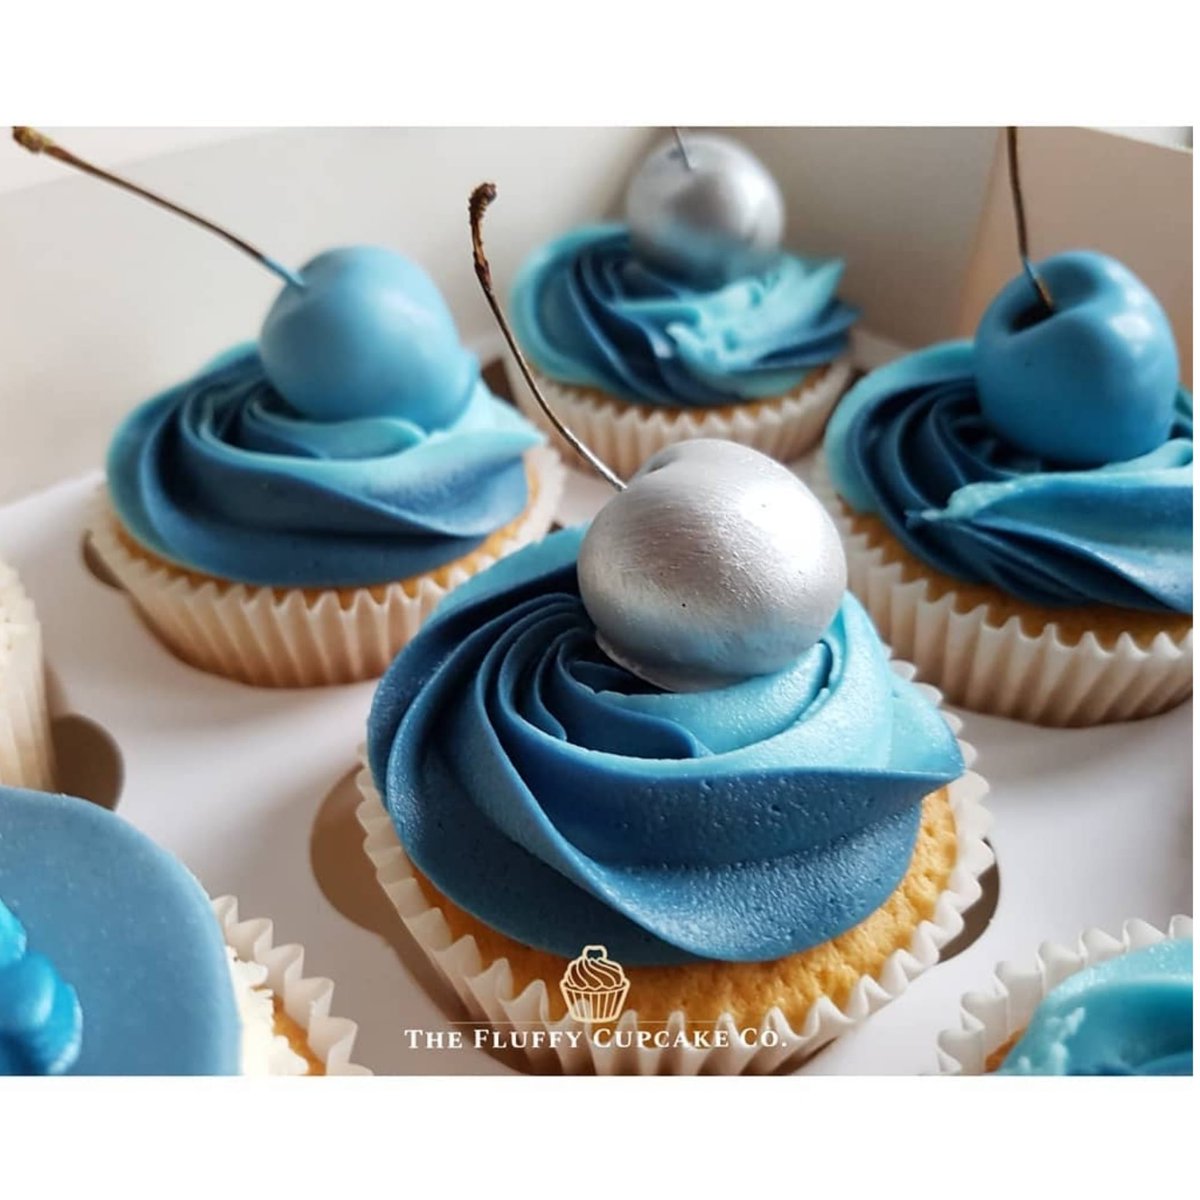 Blue & Silver theme cupcakes...we love a good combo! #thefluffycupcakeco #cherries #blueandsilver #sponge #tasty bakes #essexbaker #londonbaker